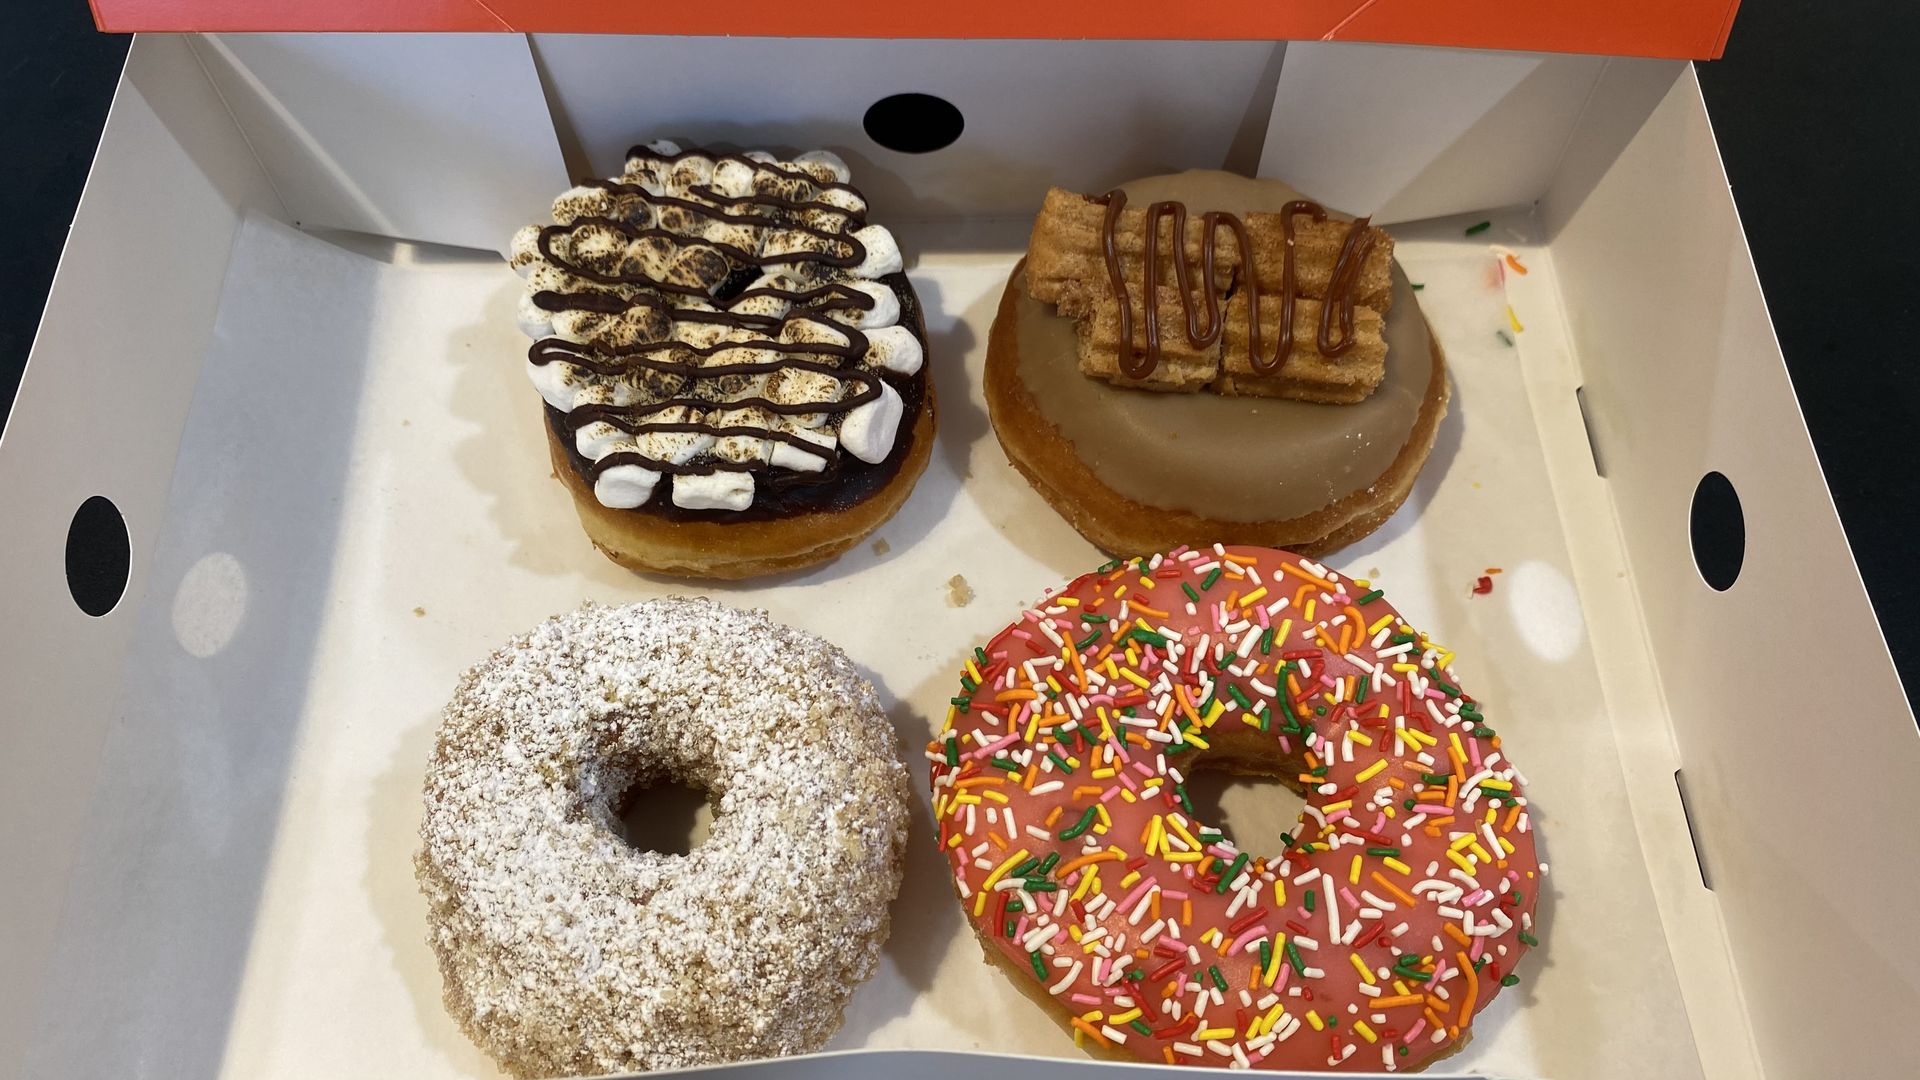 Four donuts arranged in a box.